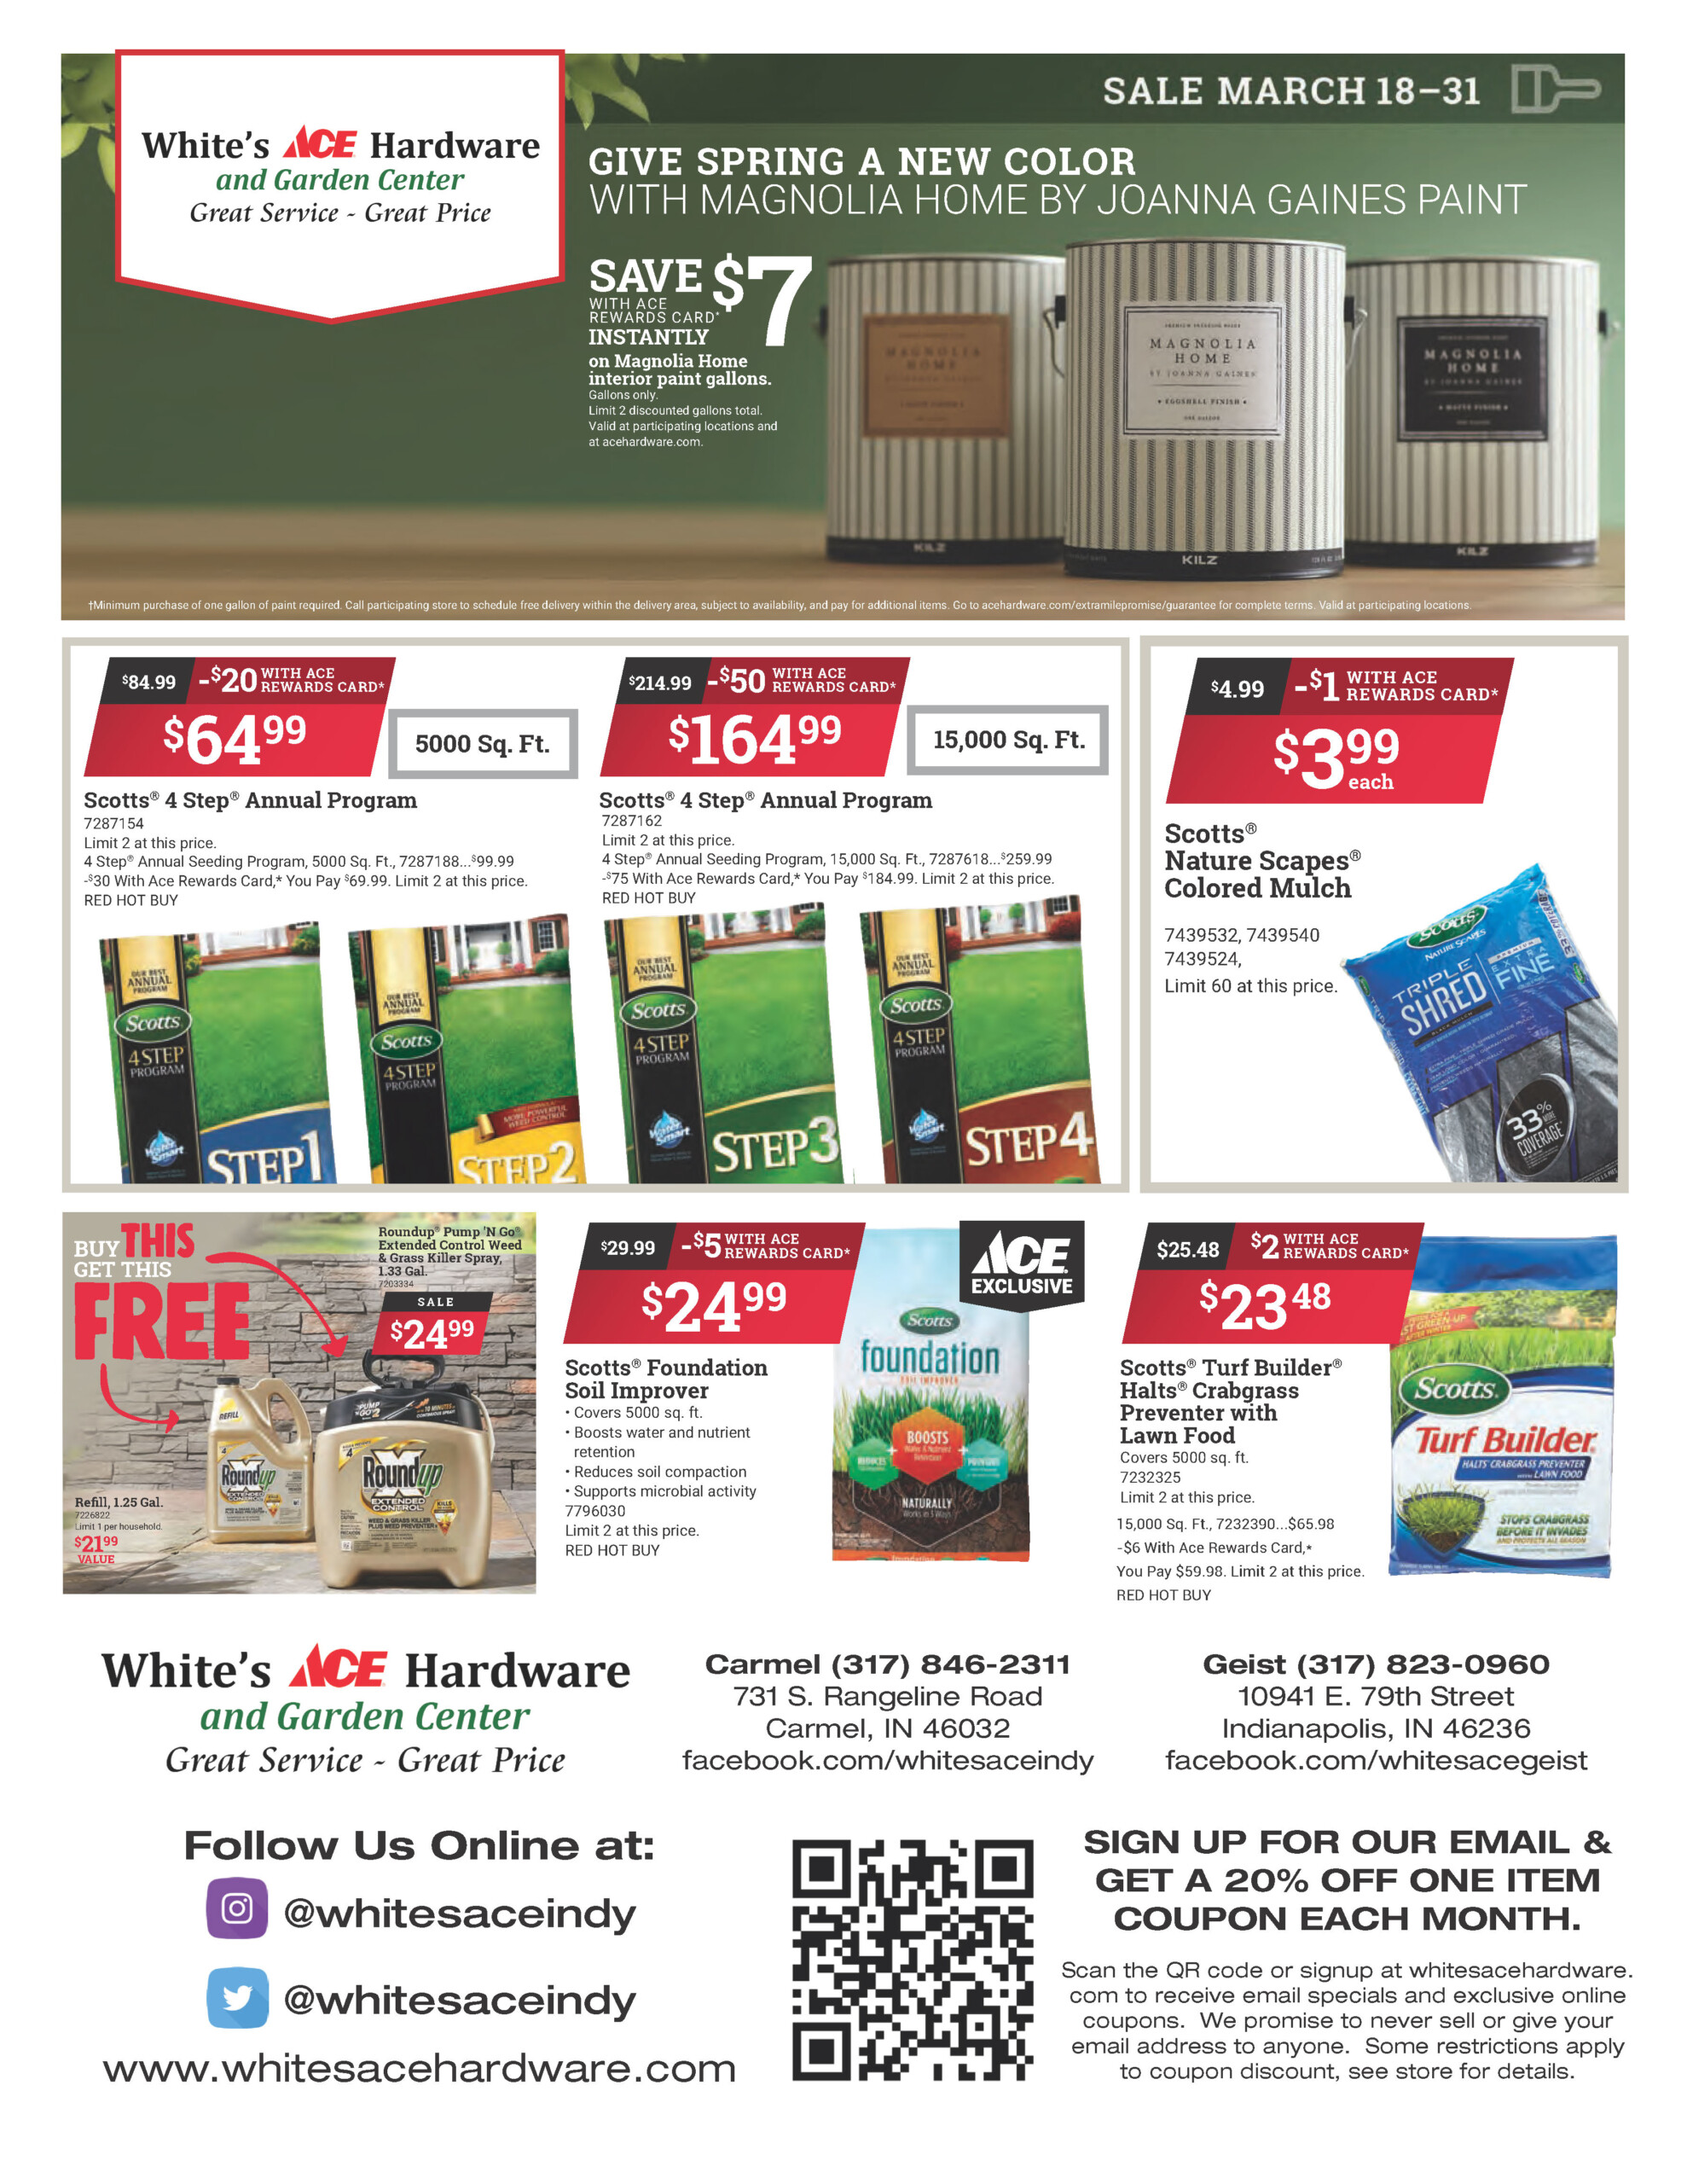 Download Printable PDF of March Ad